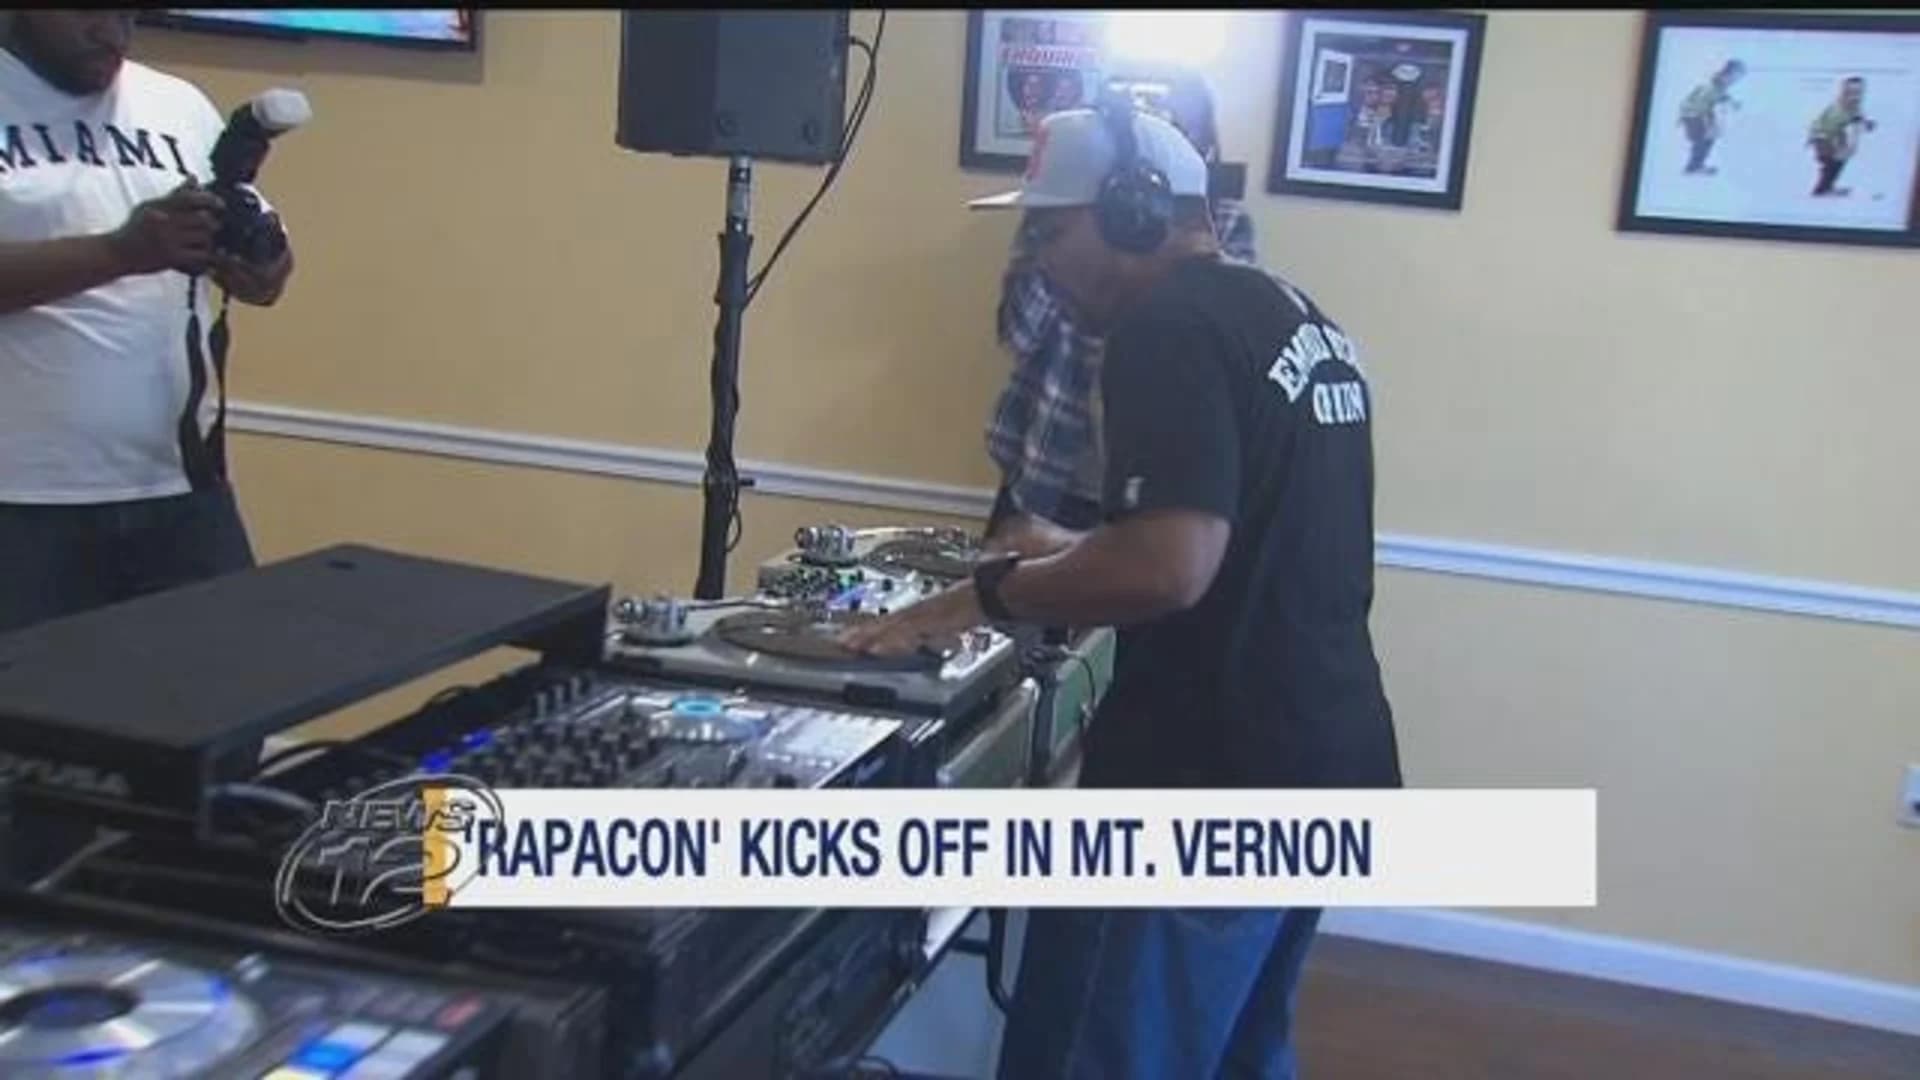 DJs scratch, freestyle at 2nd annual 'Rapacon' in Mount Vernon